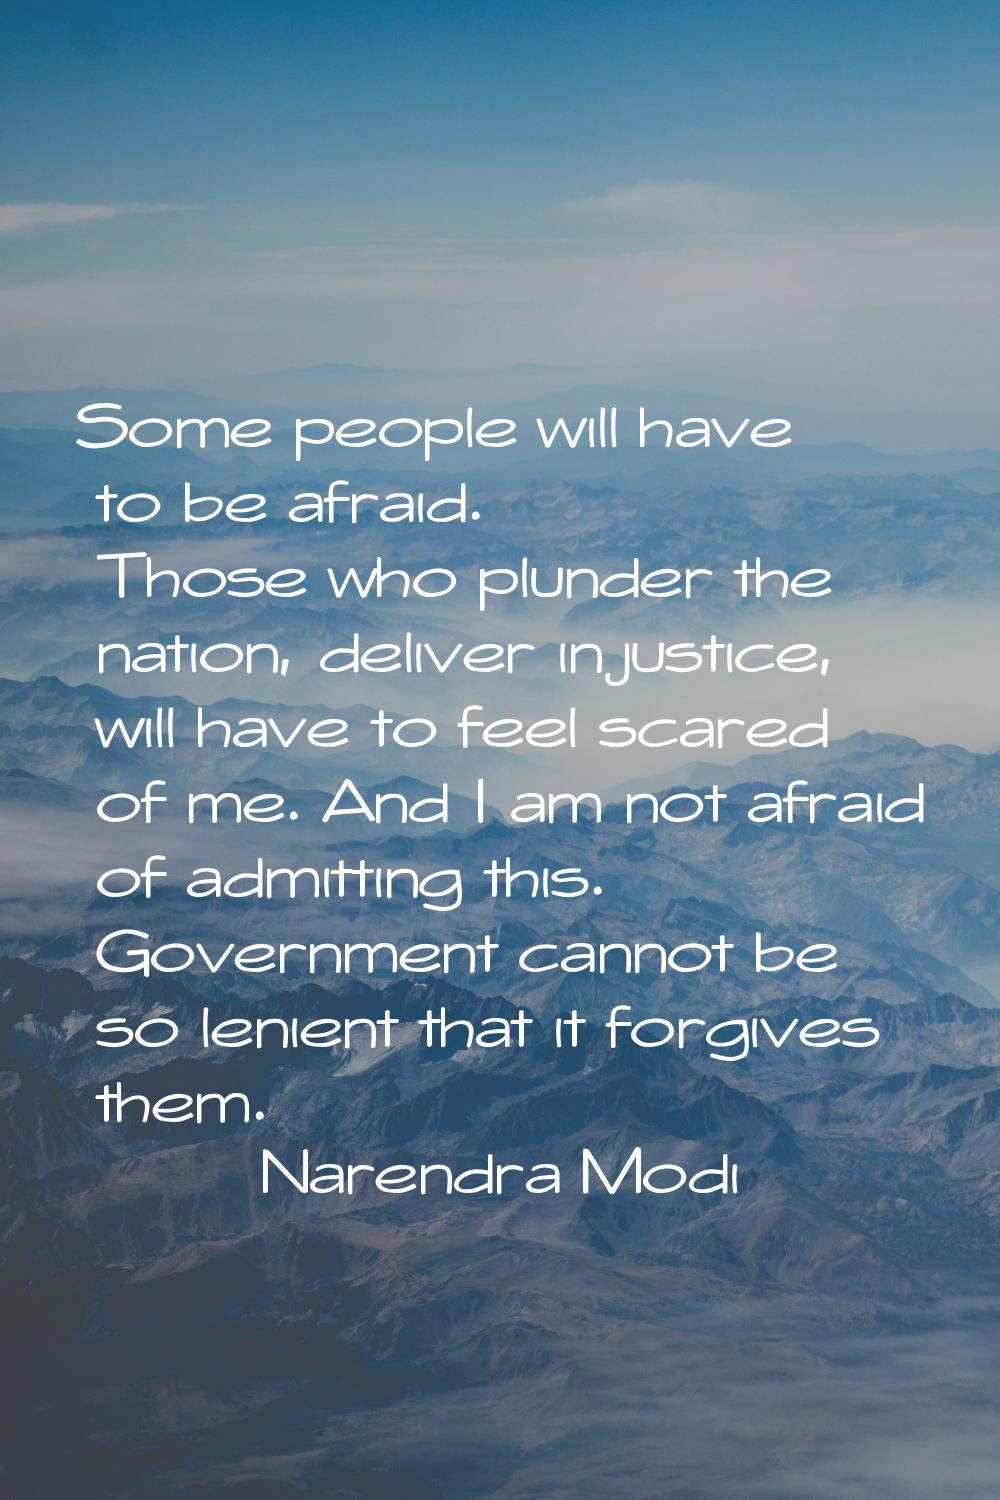 Some people will have to be afraid. Those who plunder the nation, deliver injustice, will have to f